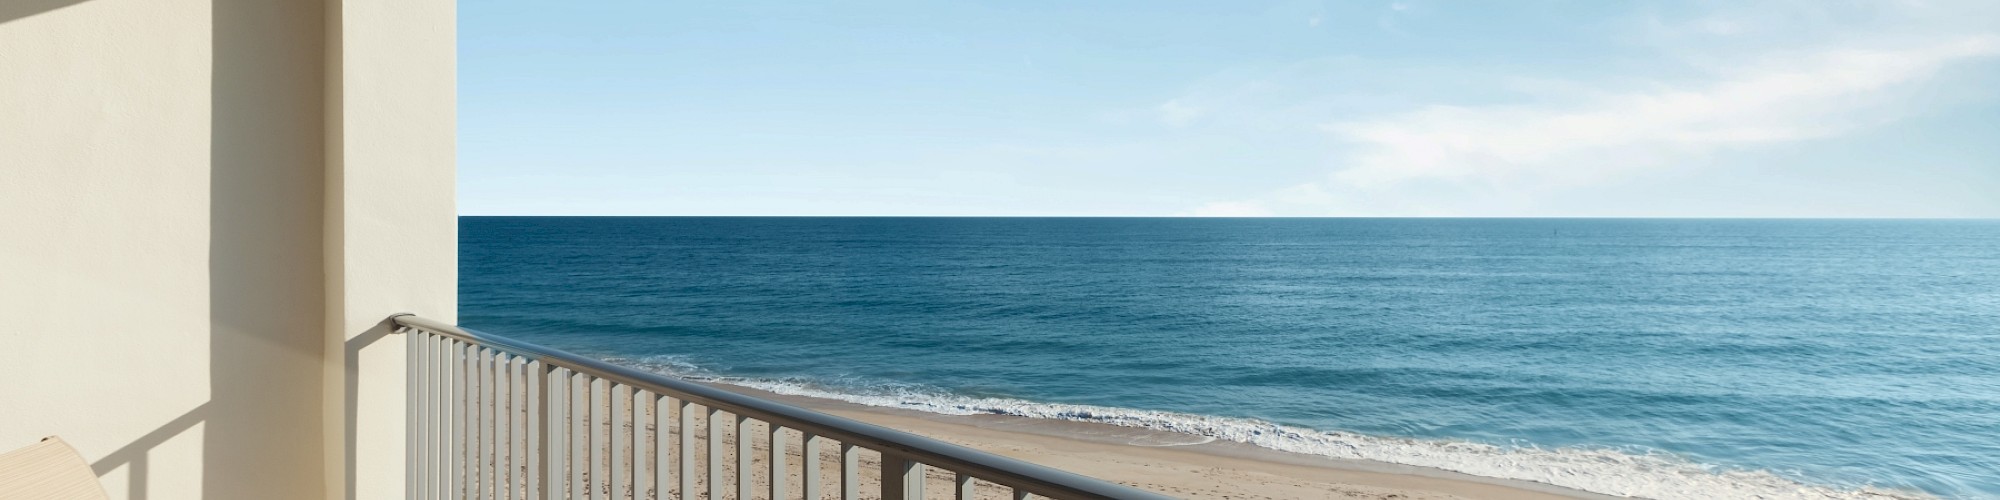 A balcony with chairs overlooks a sandy beach and the calm ocean, under a clear blue sky with a few clouds.